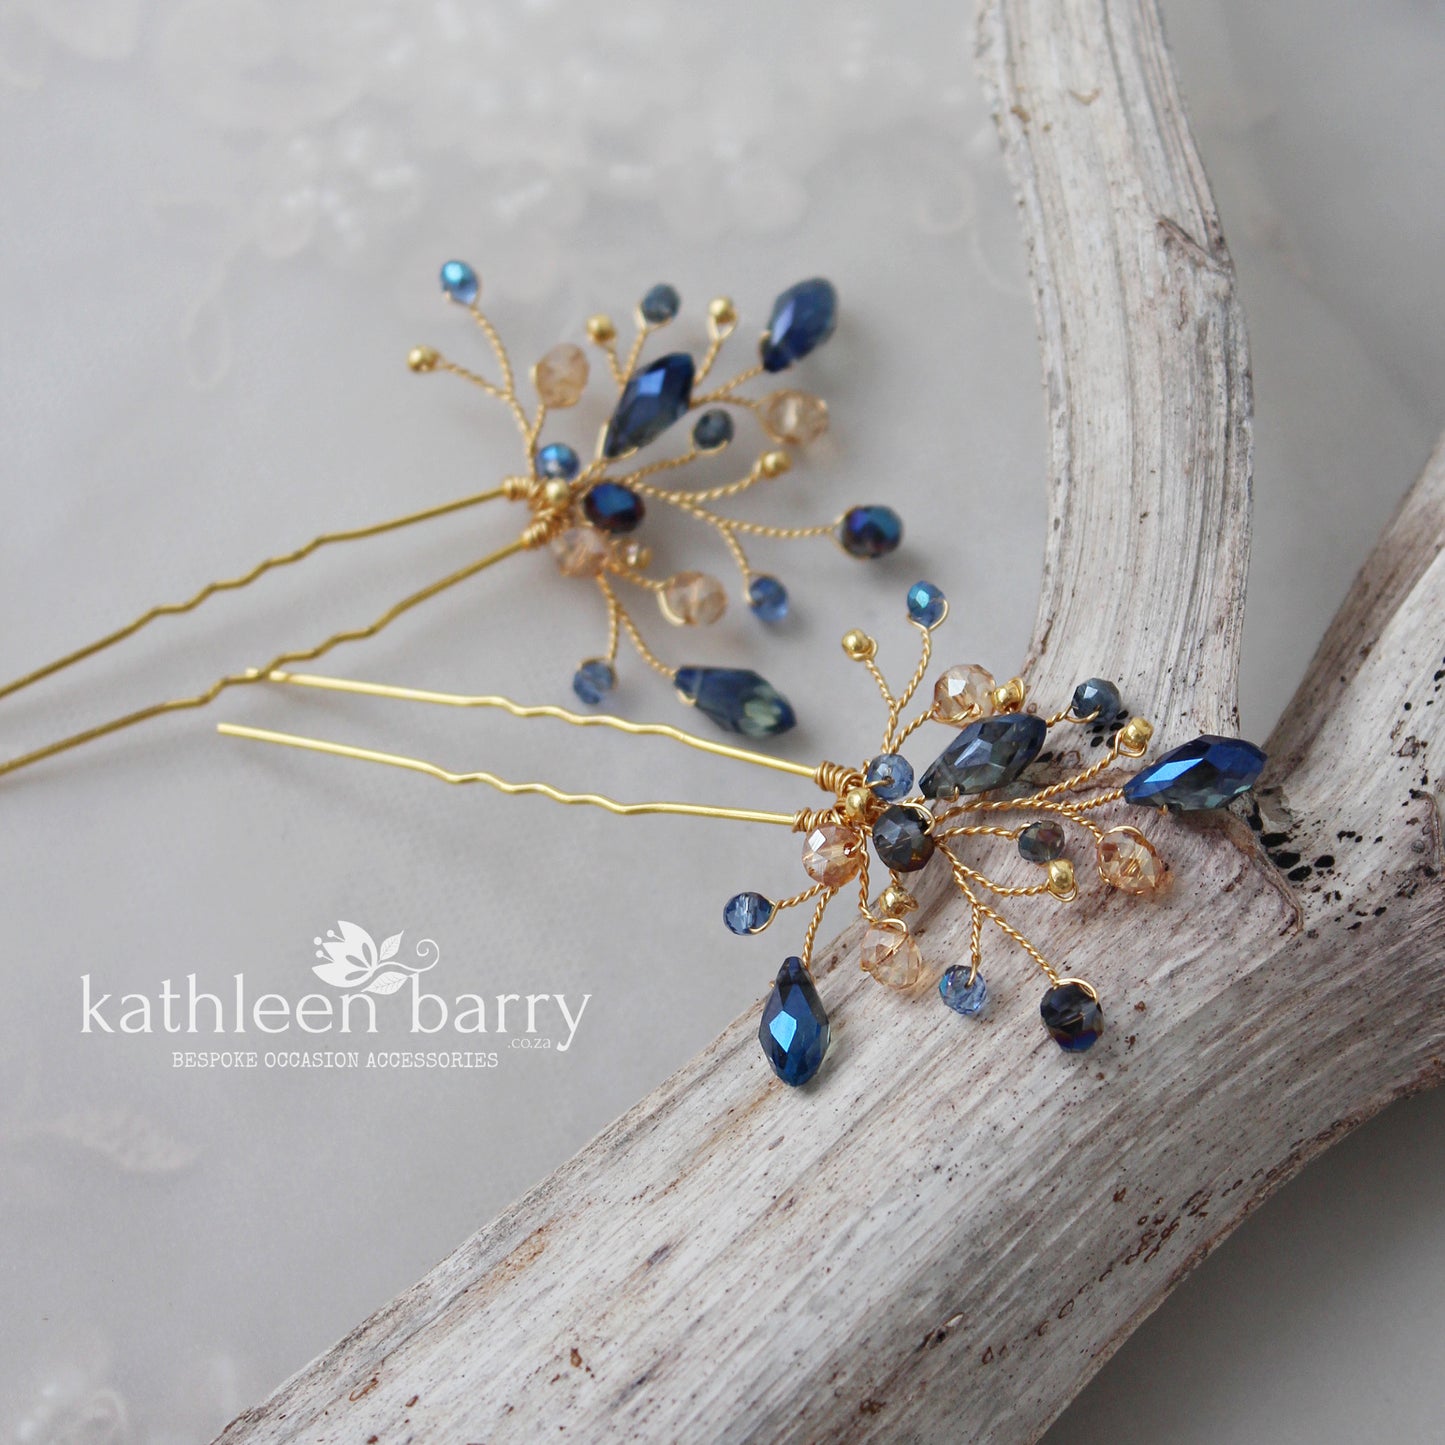 Lize hair pins navy blue, clear or opal pinks - Rose gold, Gold or silver FROM: